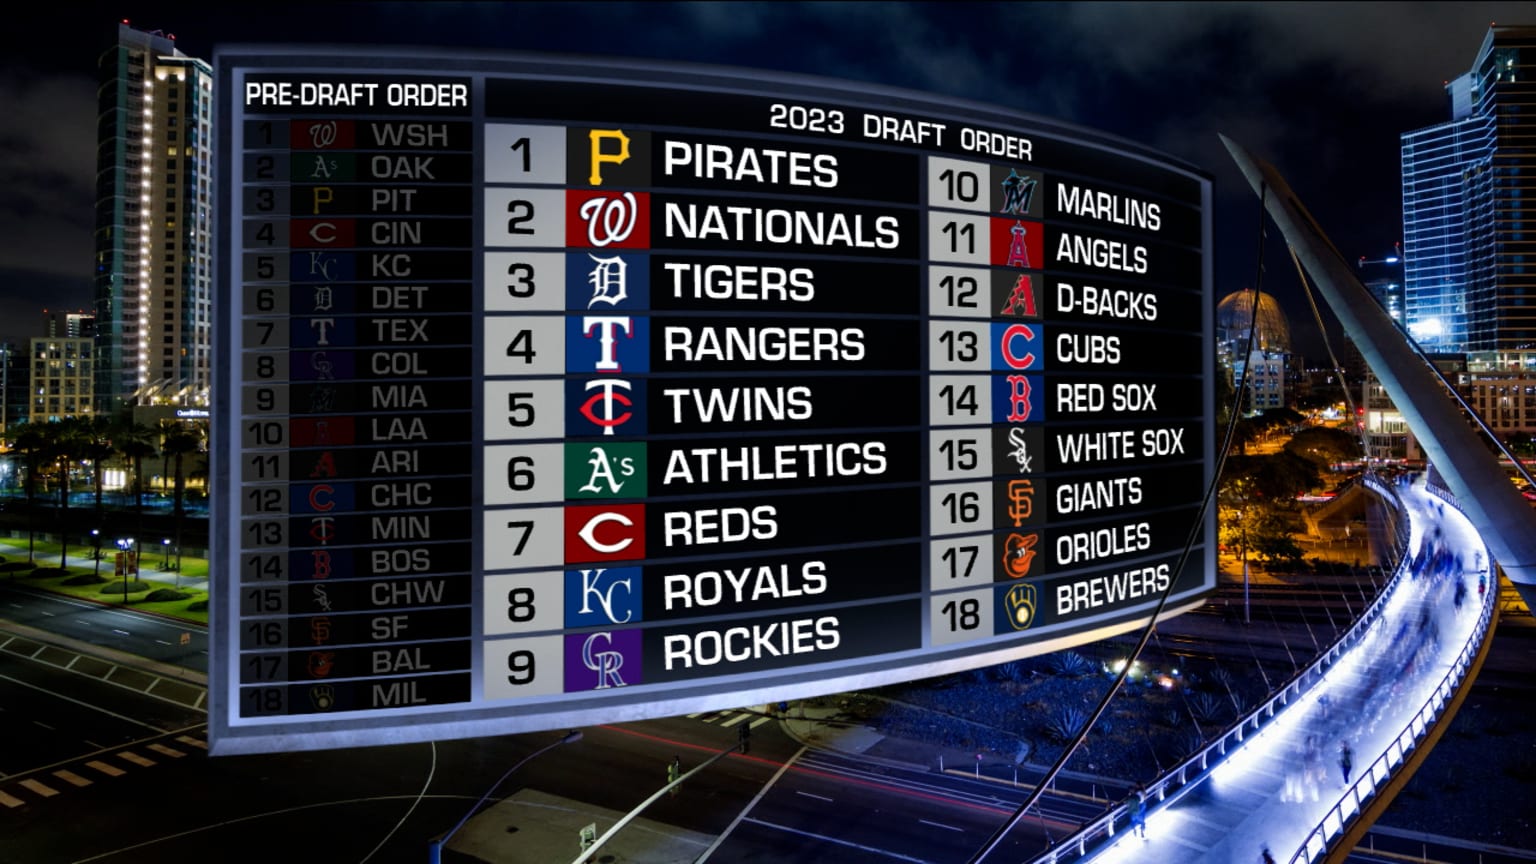 Pirates win first Draft Lottery 12/07/2022 Pittsburgh Pirates